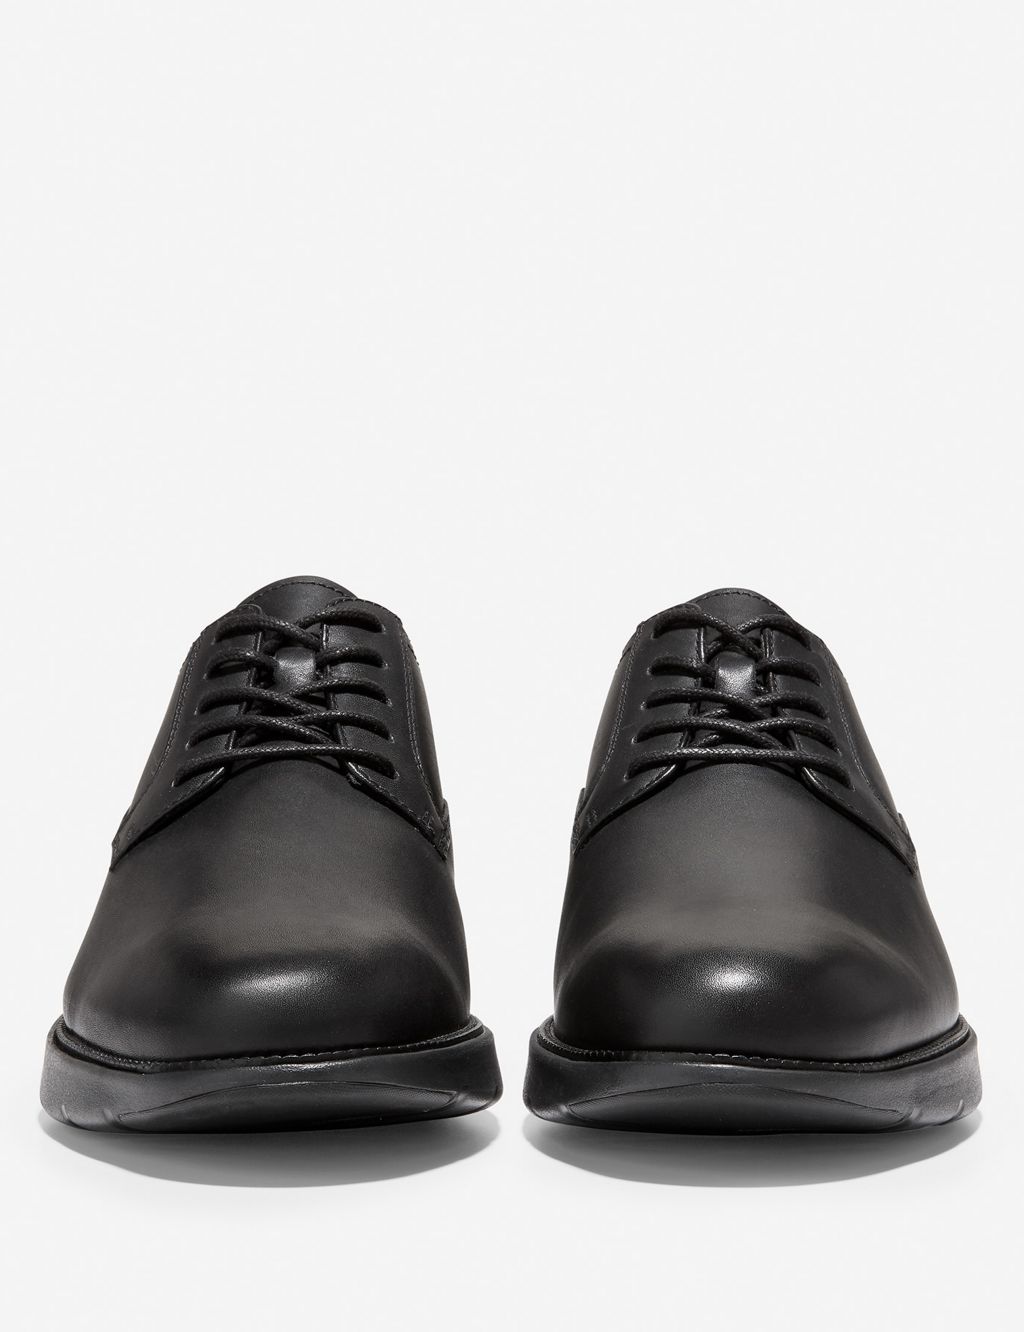 Grand Atlantic Wide Fit Leather Oxford Shoes image 5